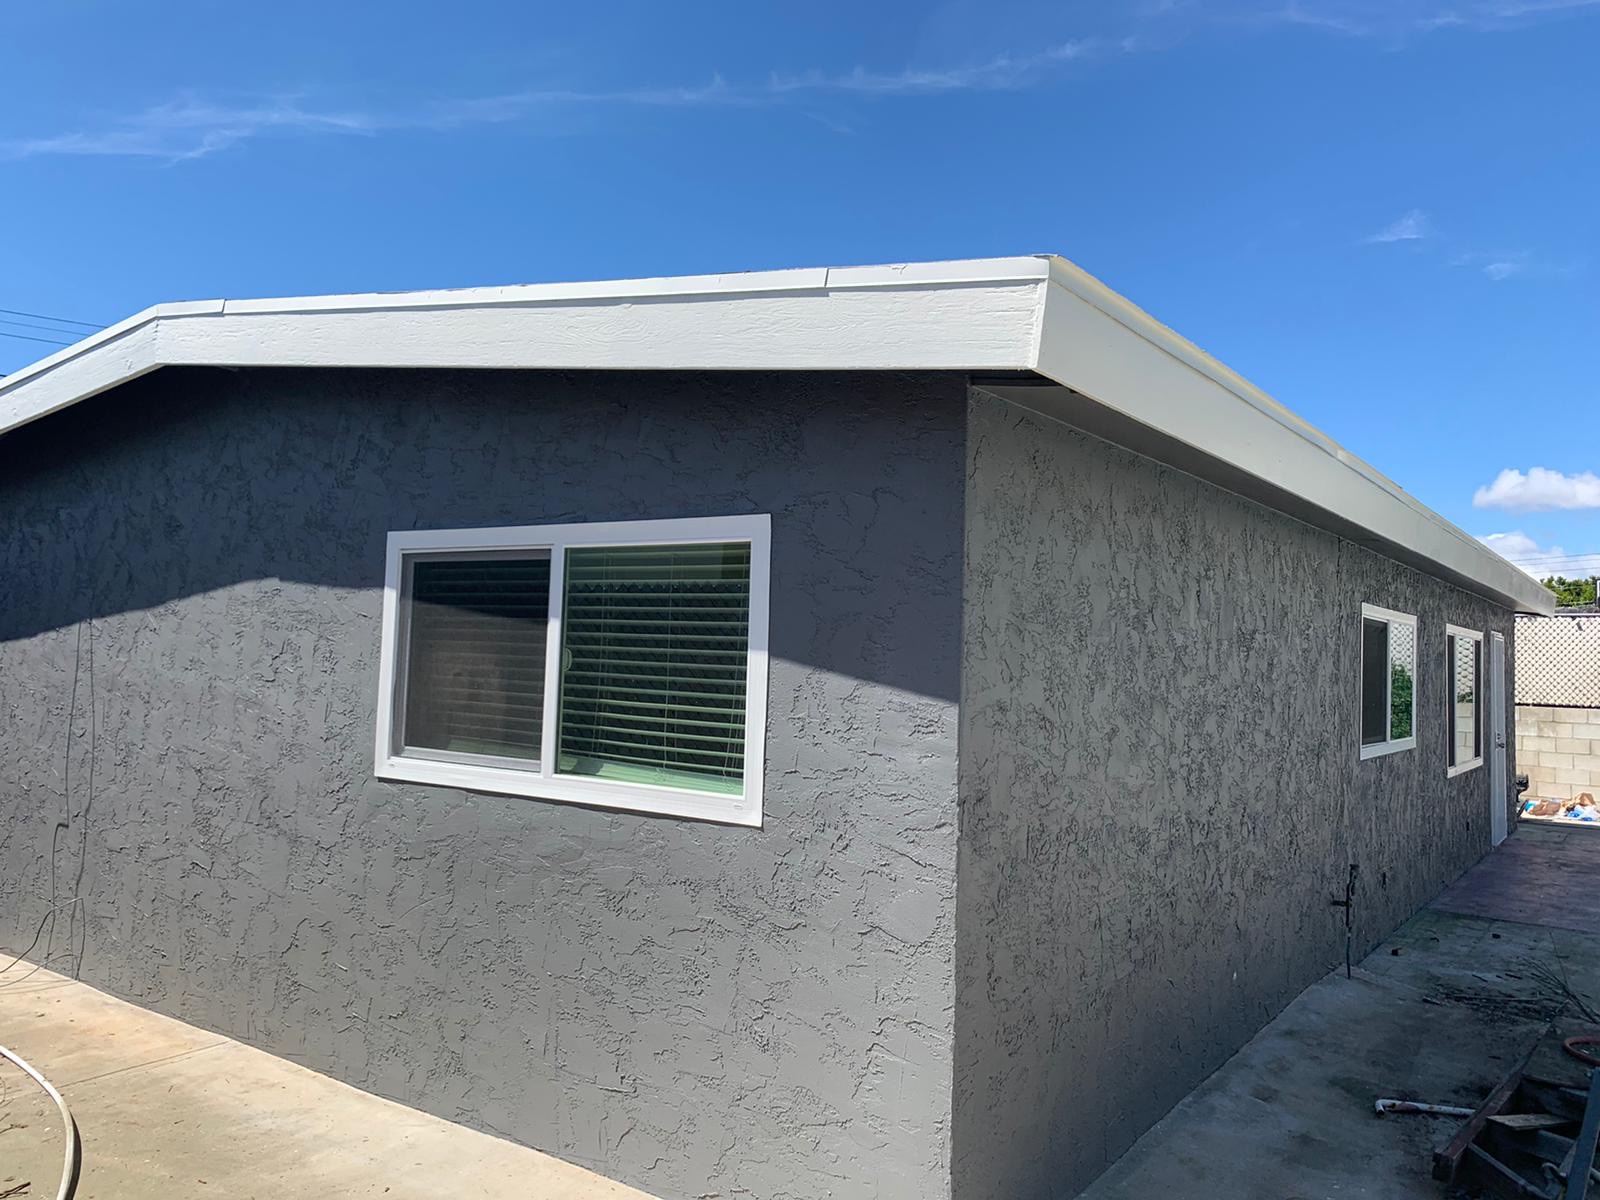 ﻿﻿Completed House Painting in Chula Vista, CA 91911